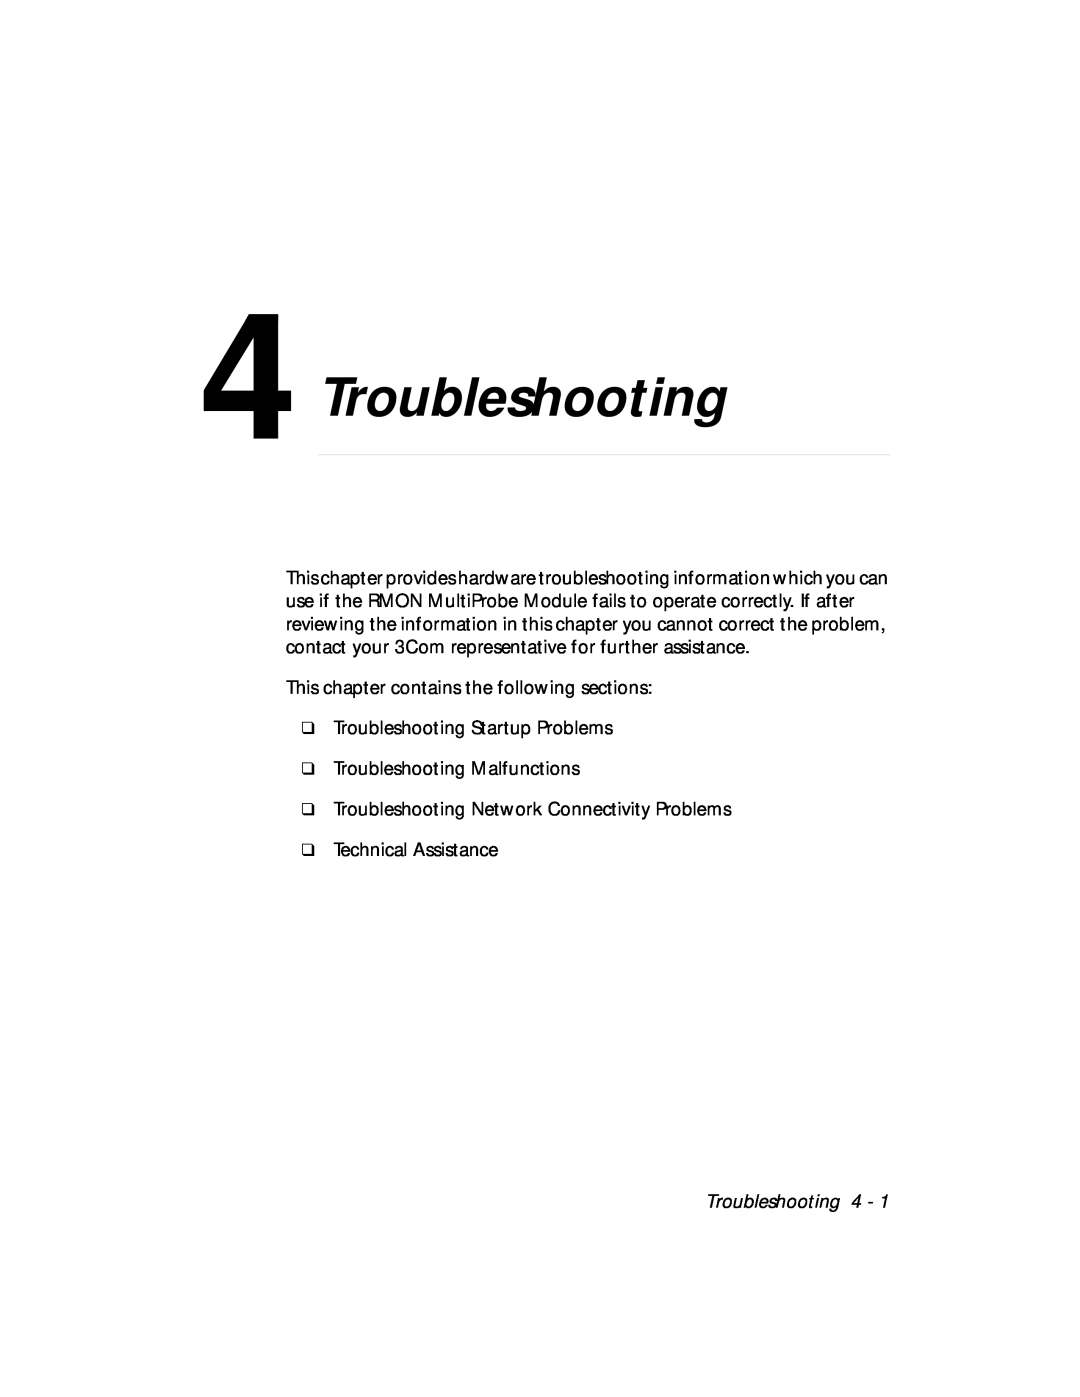 3Com RMON-EMP-3 installation and operation guide Troubleshooting 4 